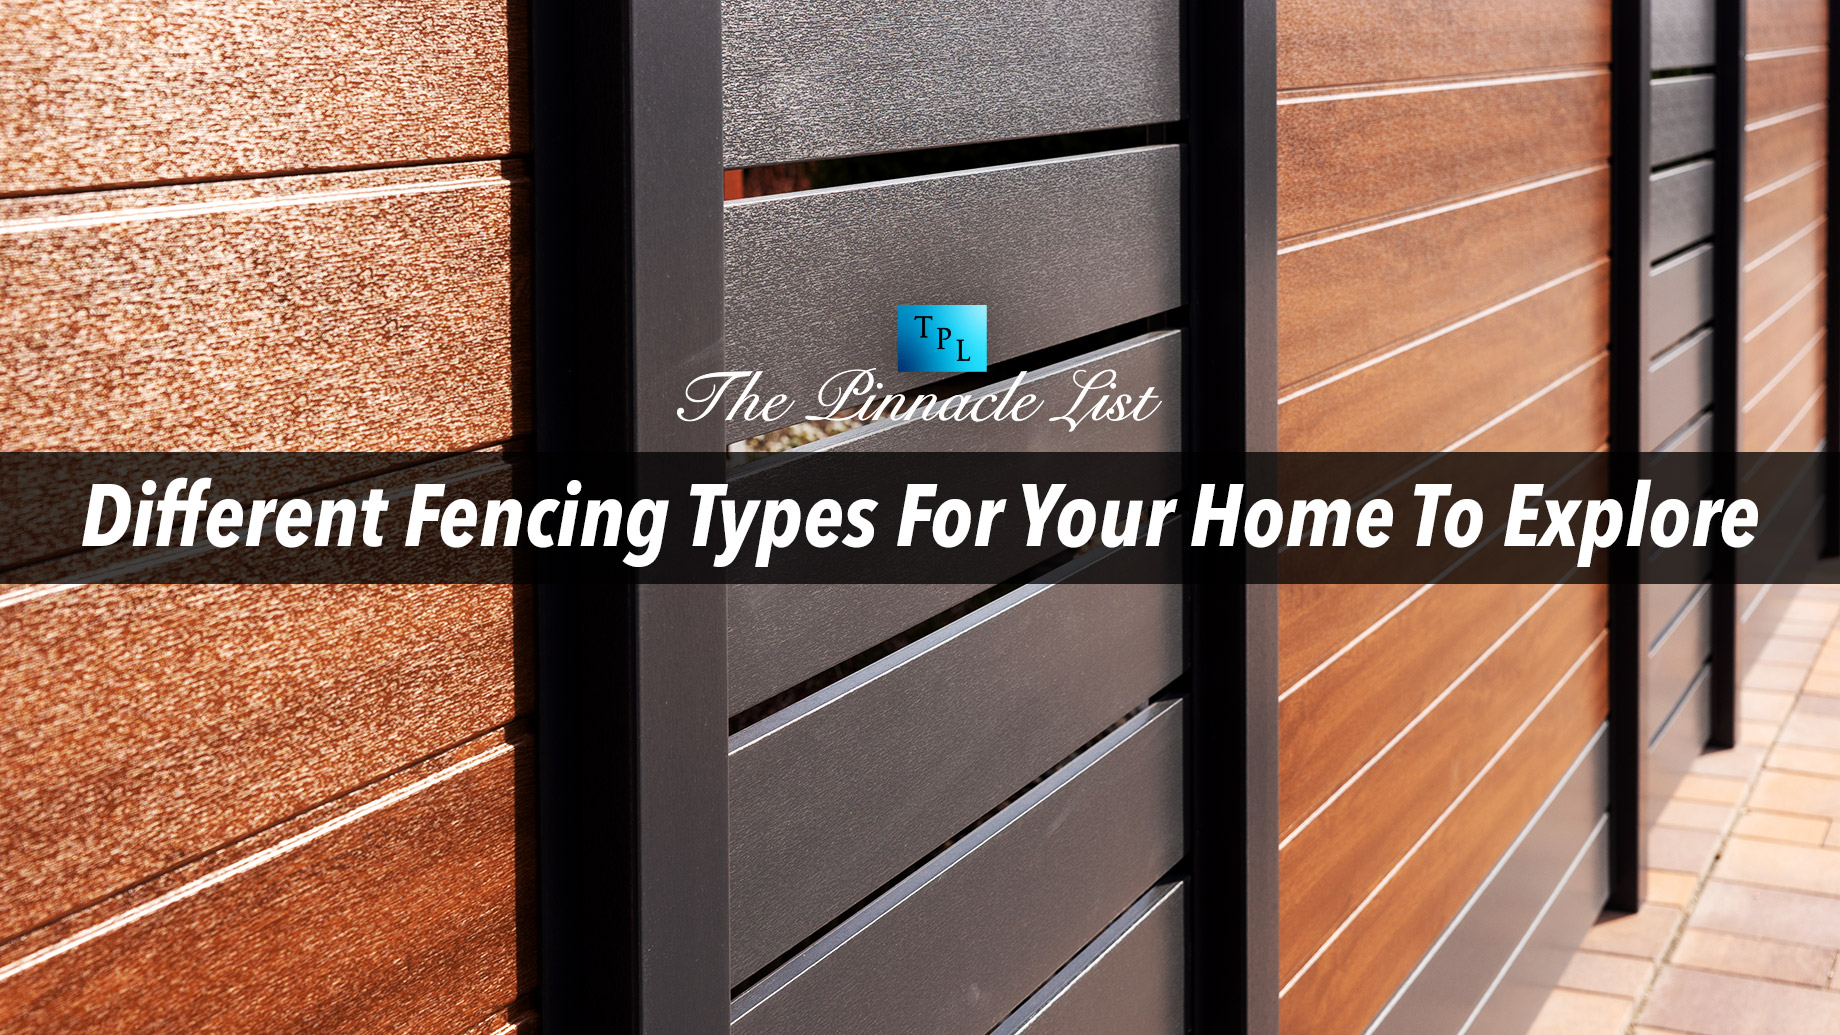 Different Fencing Types For Your Home To Explore